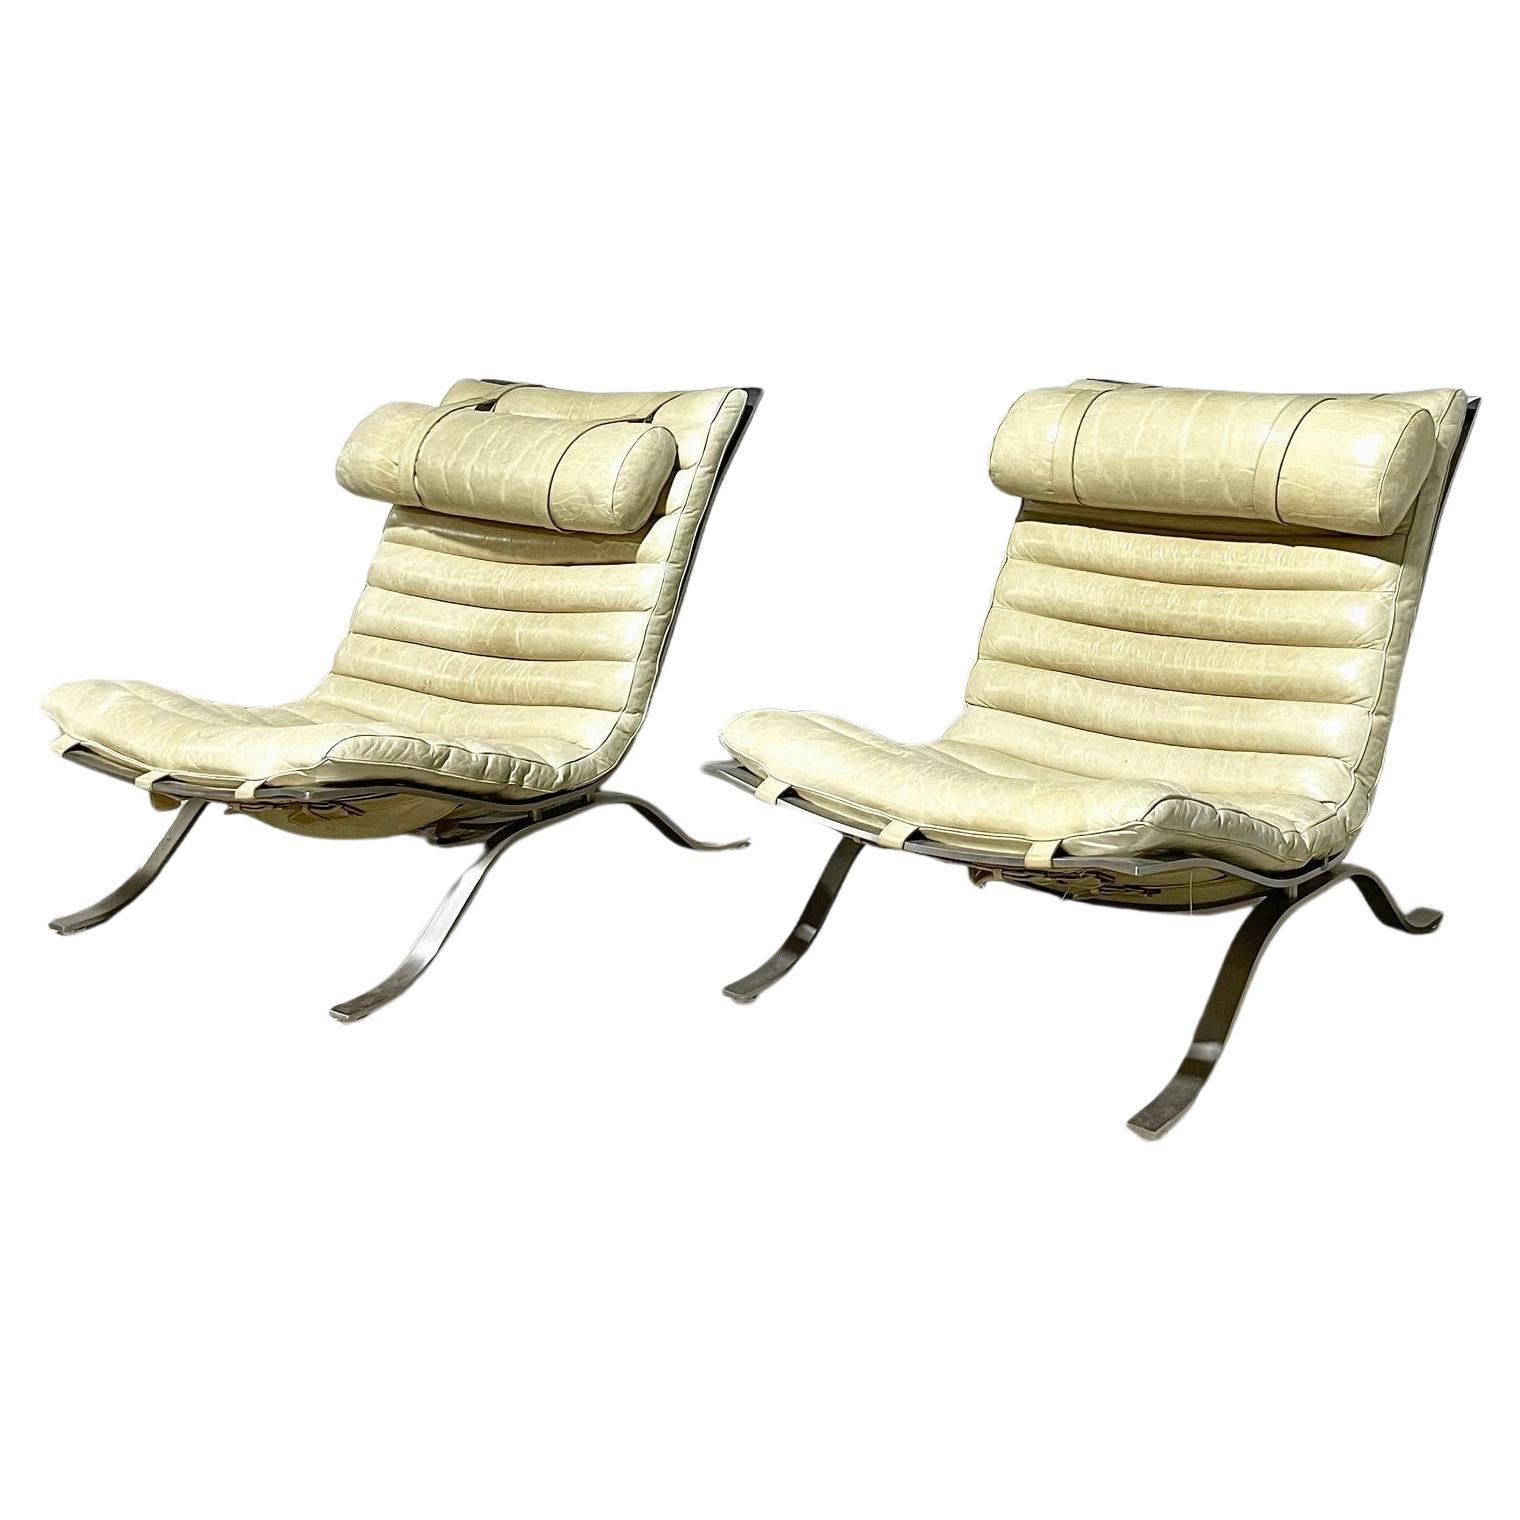 Pair of Arne Norell "Ari" Lounge Chairs